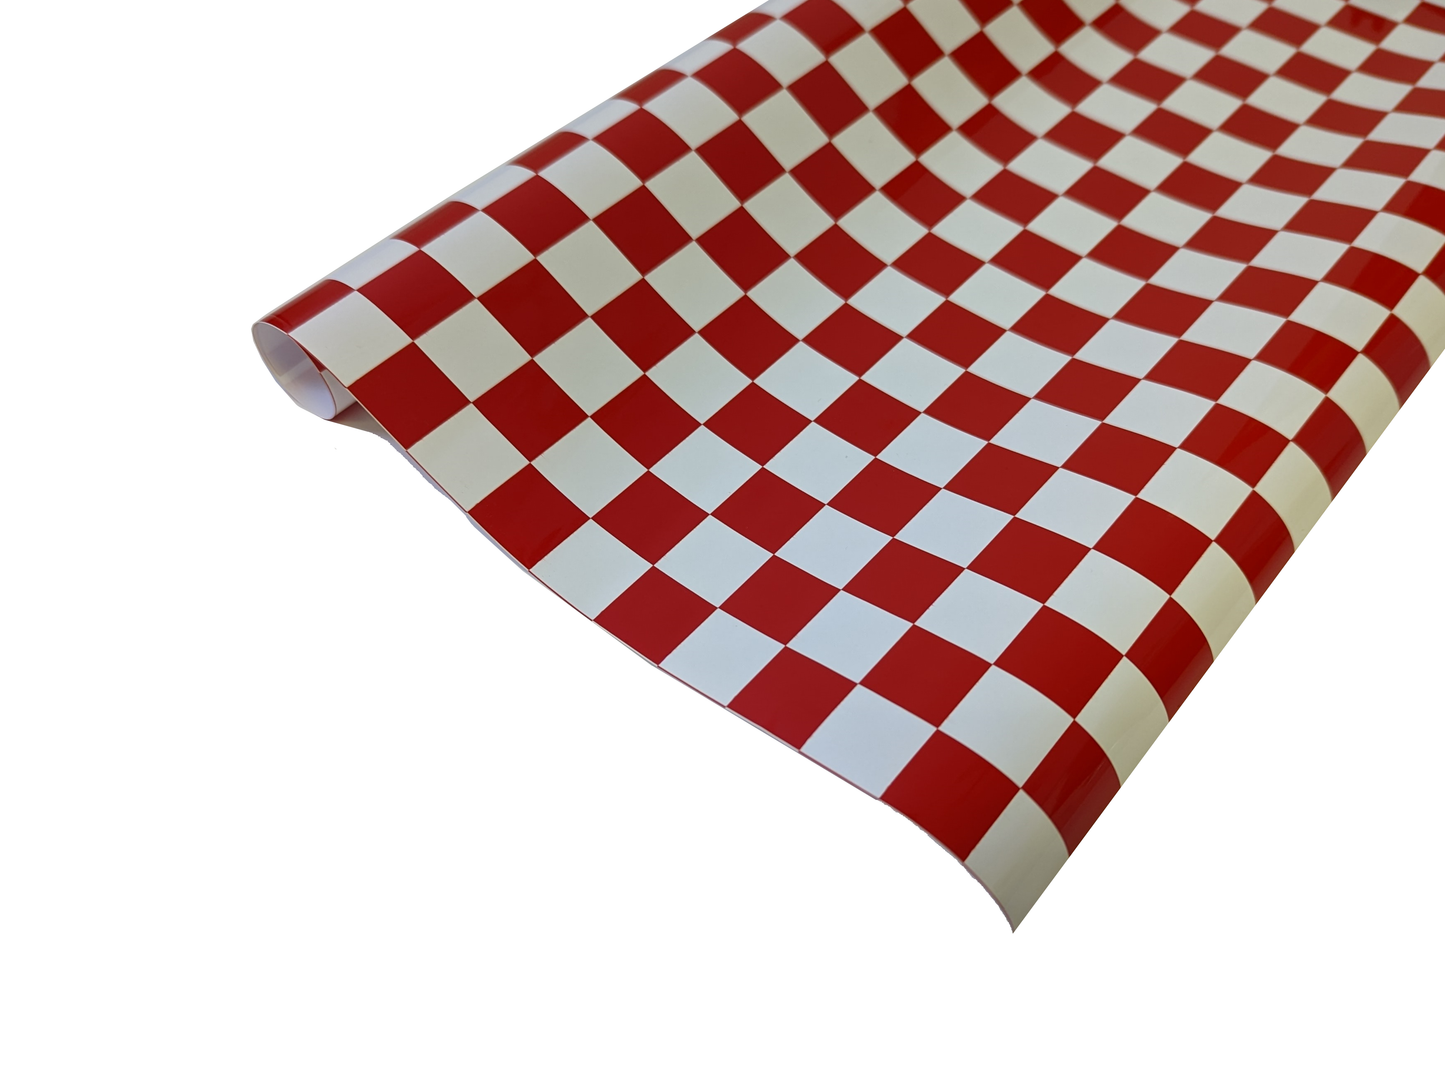 Flight Film covering Material, Heat shrink RC airplane covering - Red and White Chequer